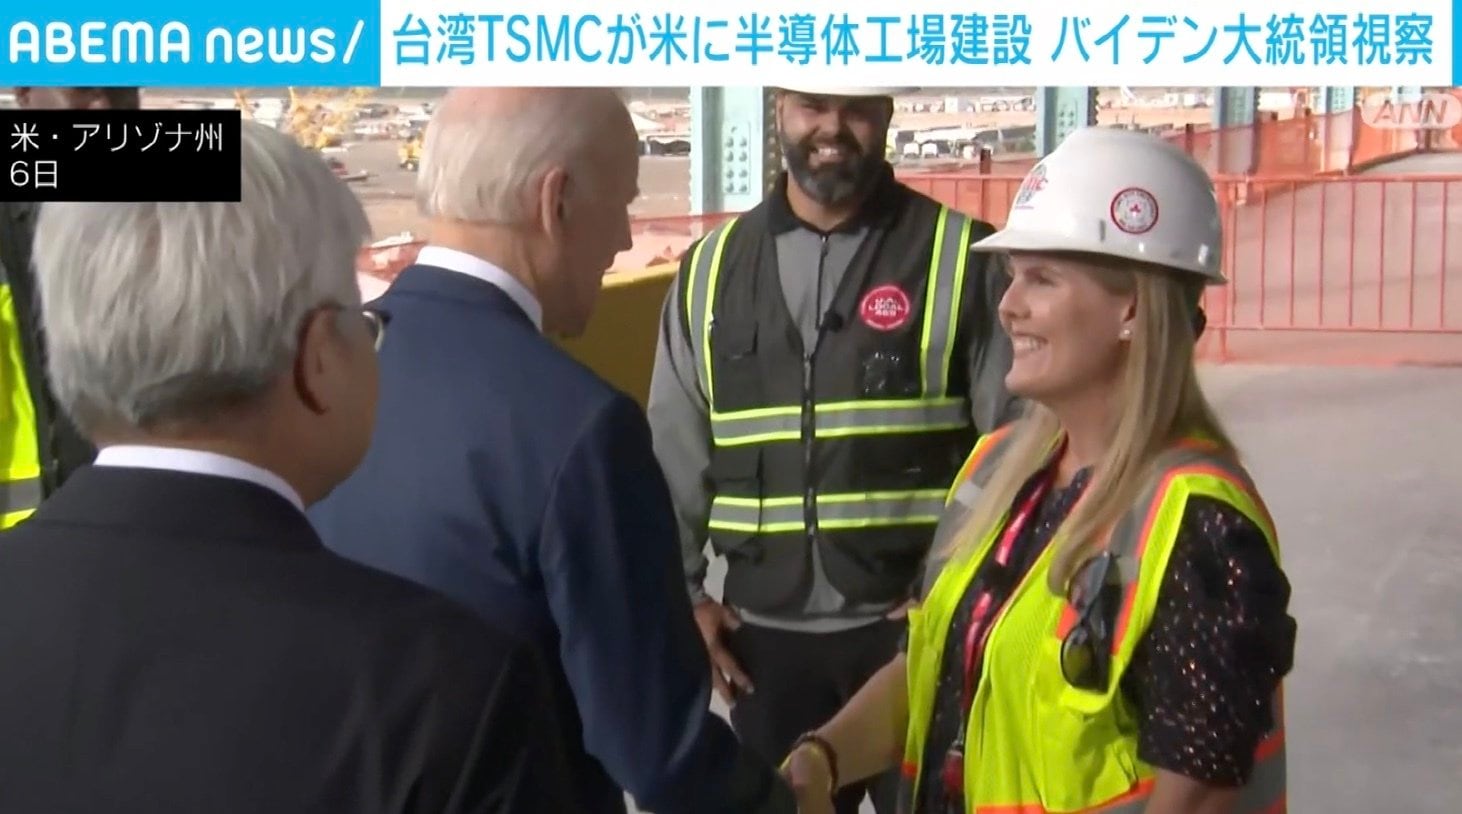 President Biden welcomes construction of a semiconductor factory in Arizona “Advantageous in leading the world” | International | ABEMA TIMES